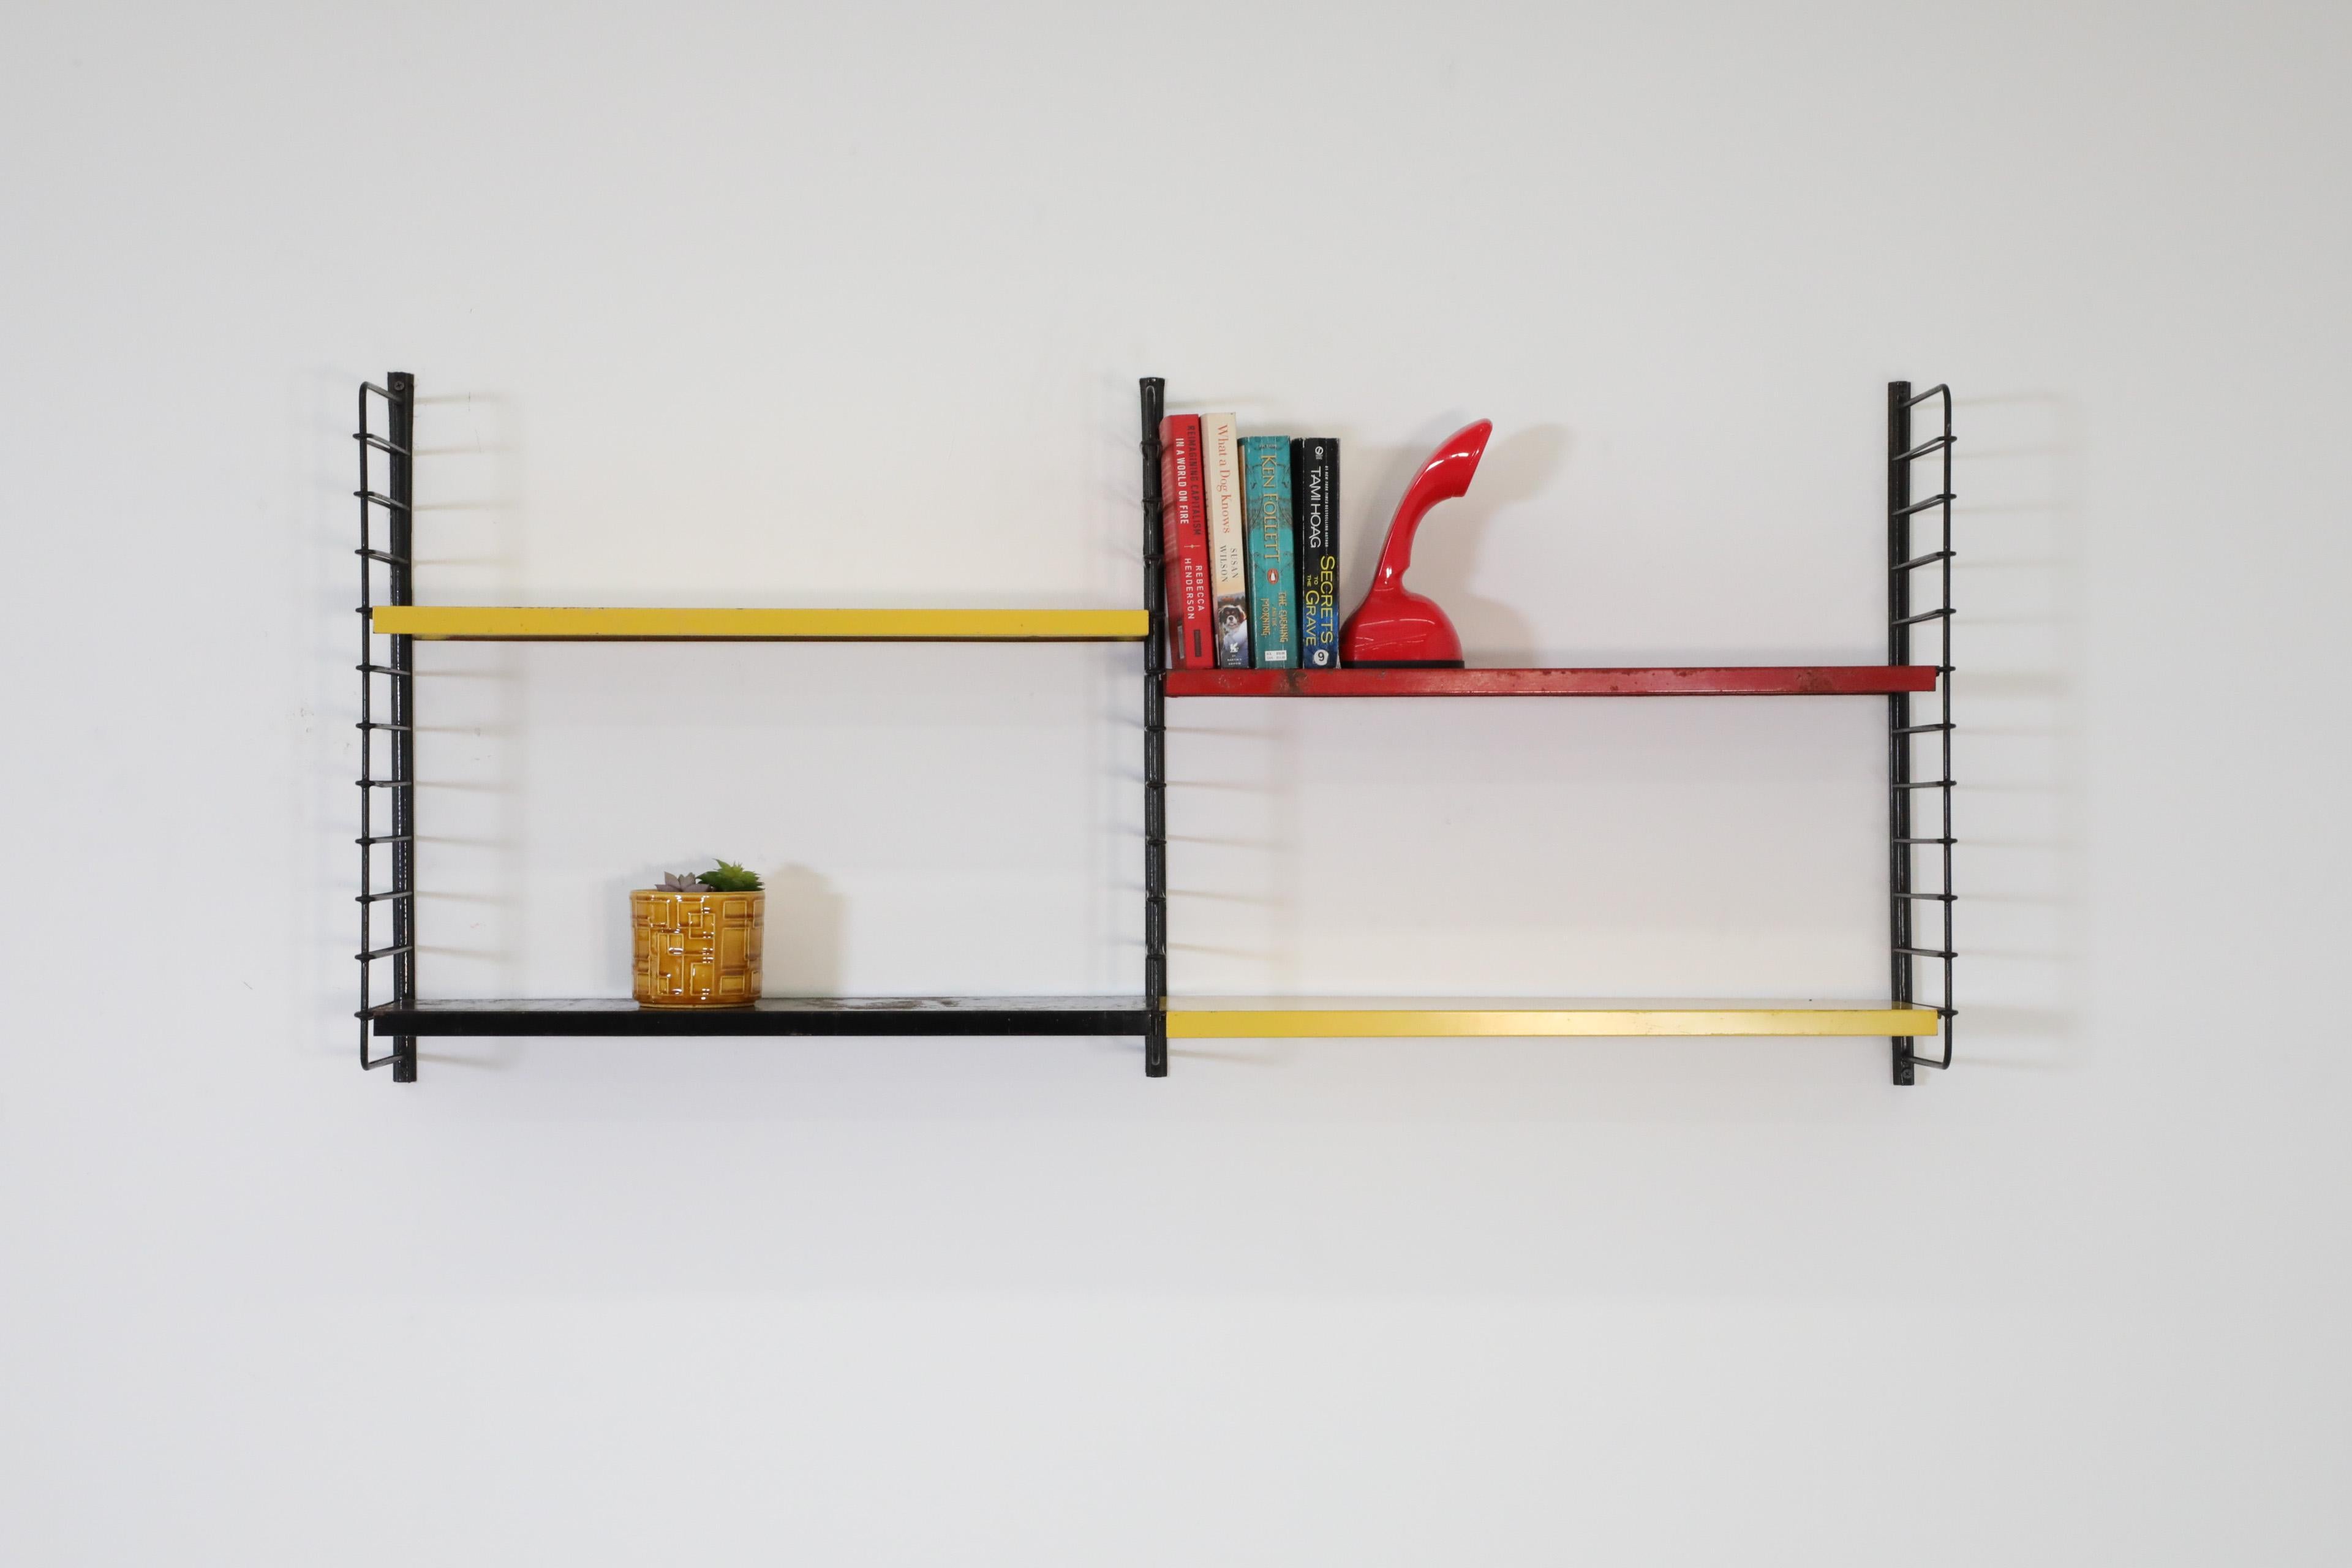 Dutch Mid-Century, Tomado style, industrial two section wall mounted shelving with yellow, red and black shelves on black enameled metal risers. In original condition with visible wear consistent with its age and use. Other similar shelves